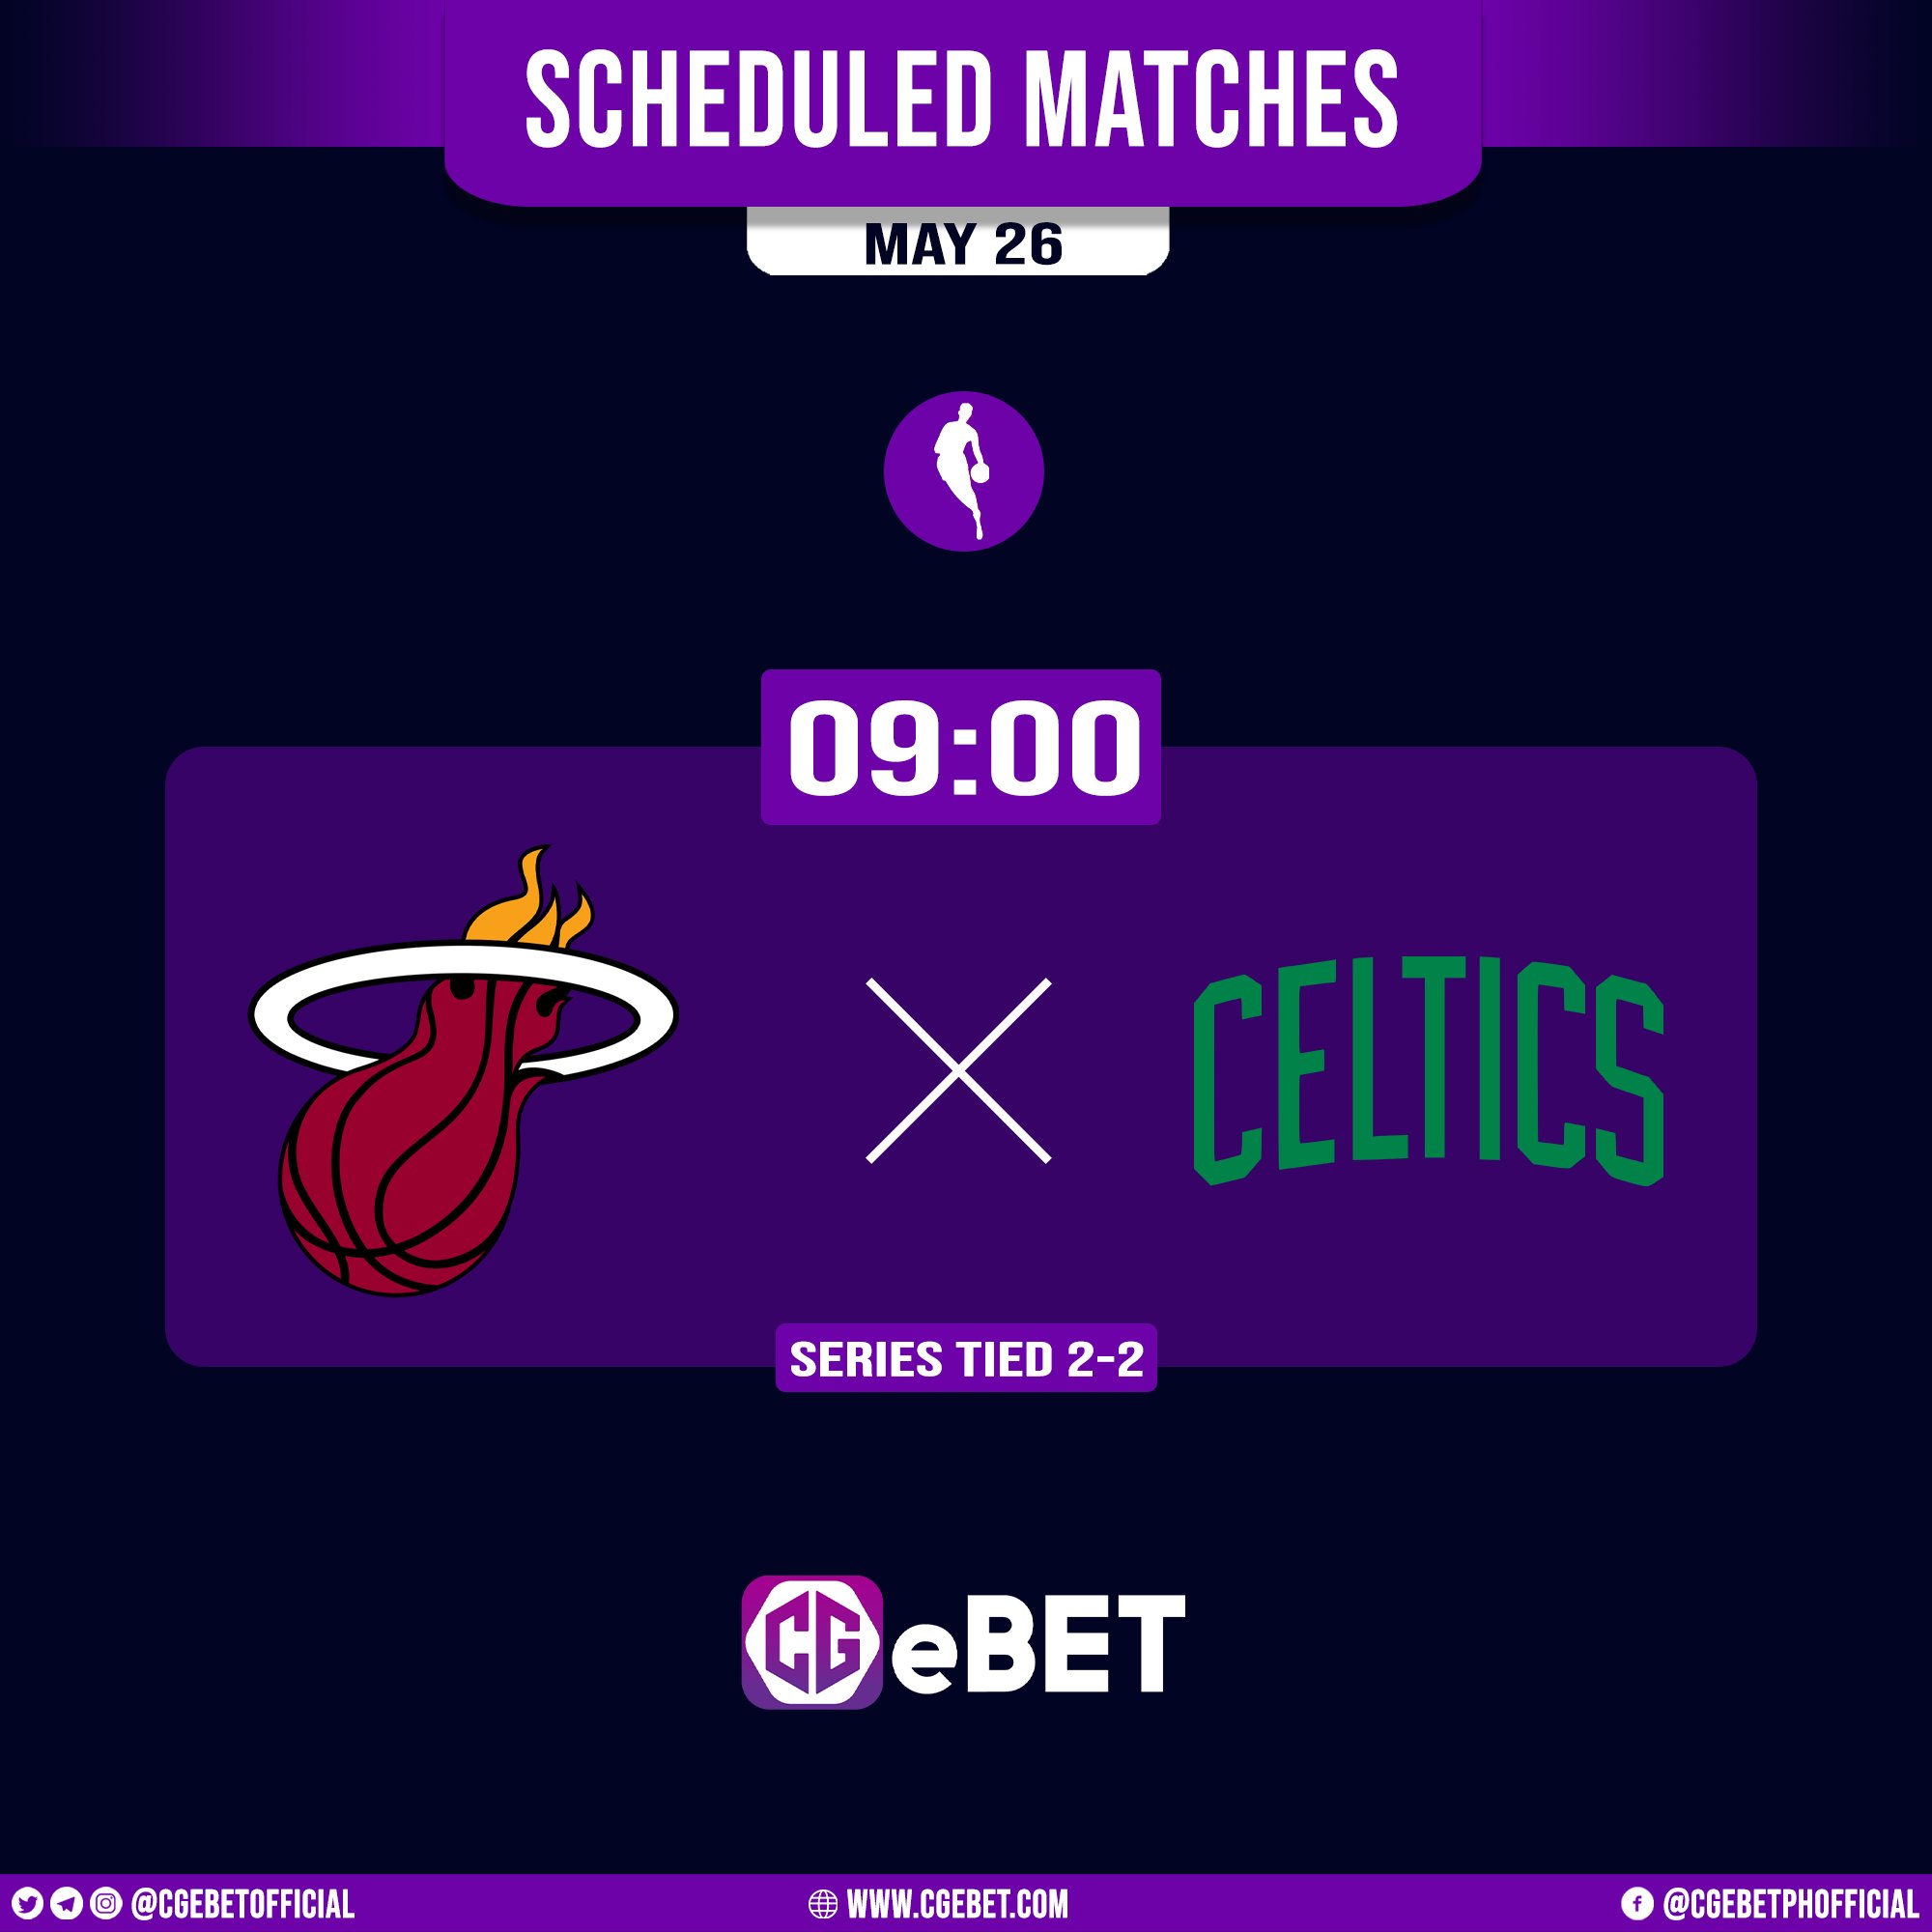 cgebet-official-on-twitter-nba-finals-schedule-for-may-26-nba-basketball-cgebet-sports